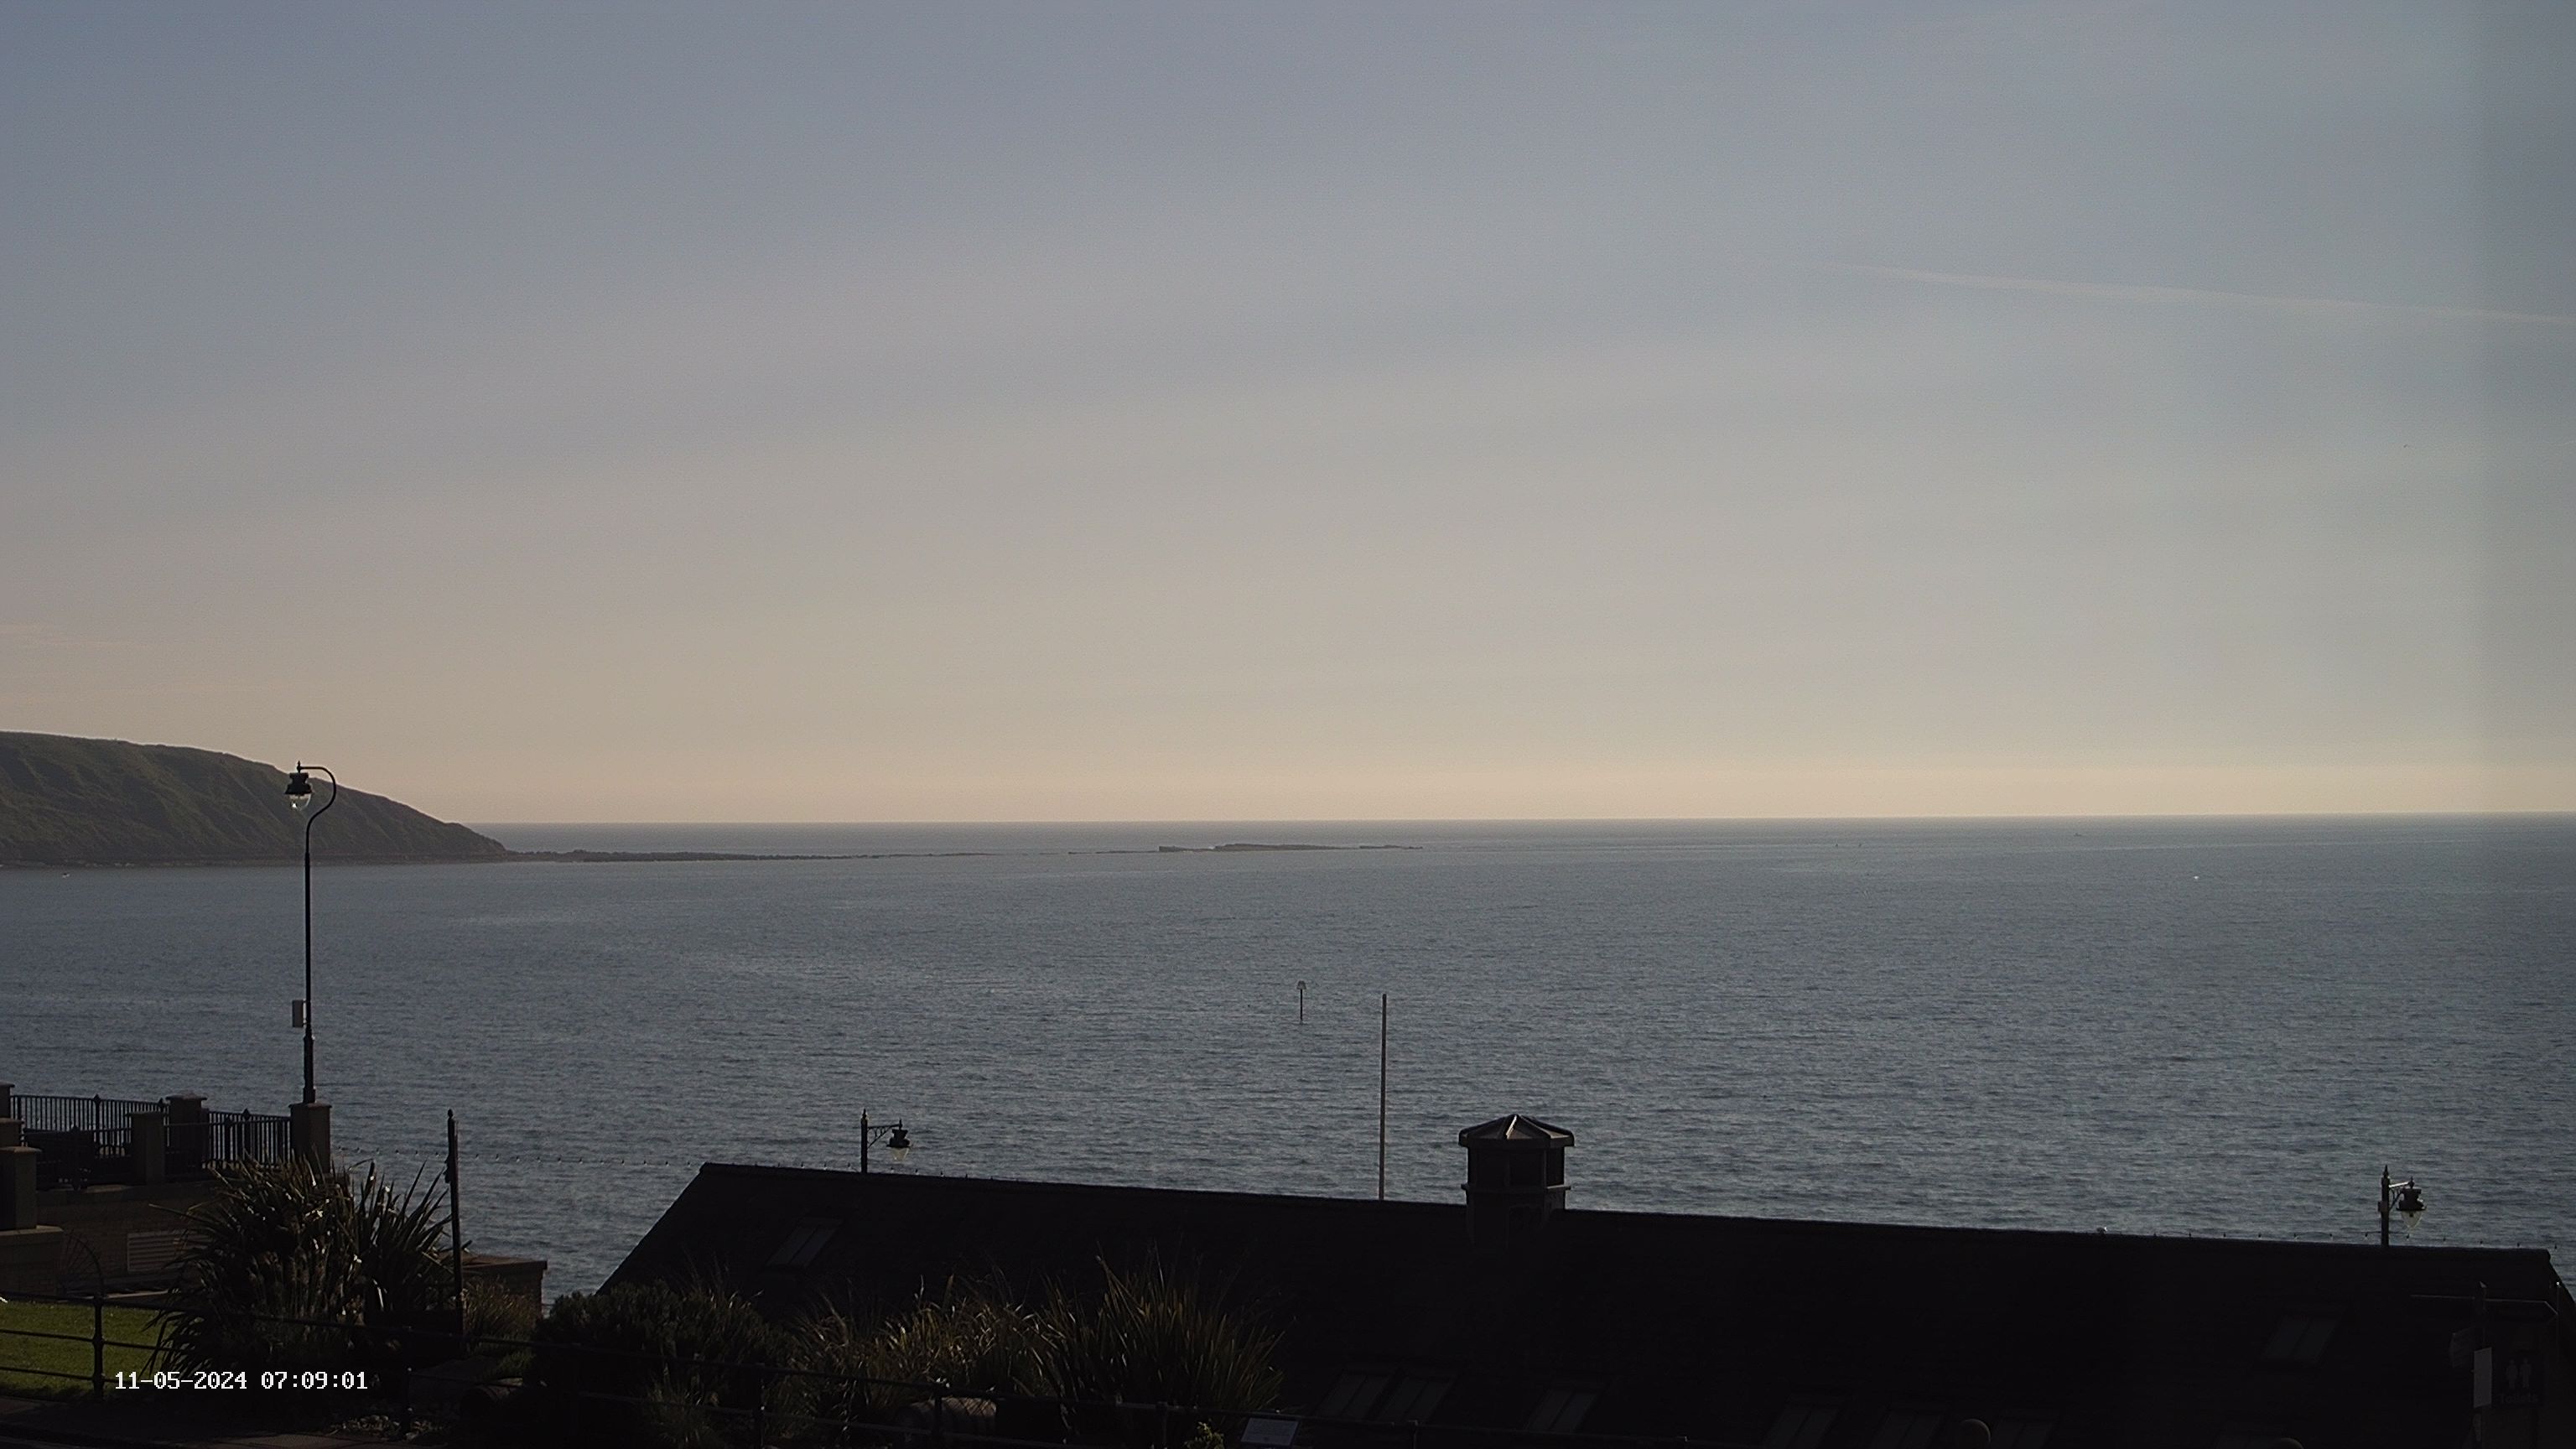 Filey Wed. 08:13